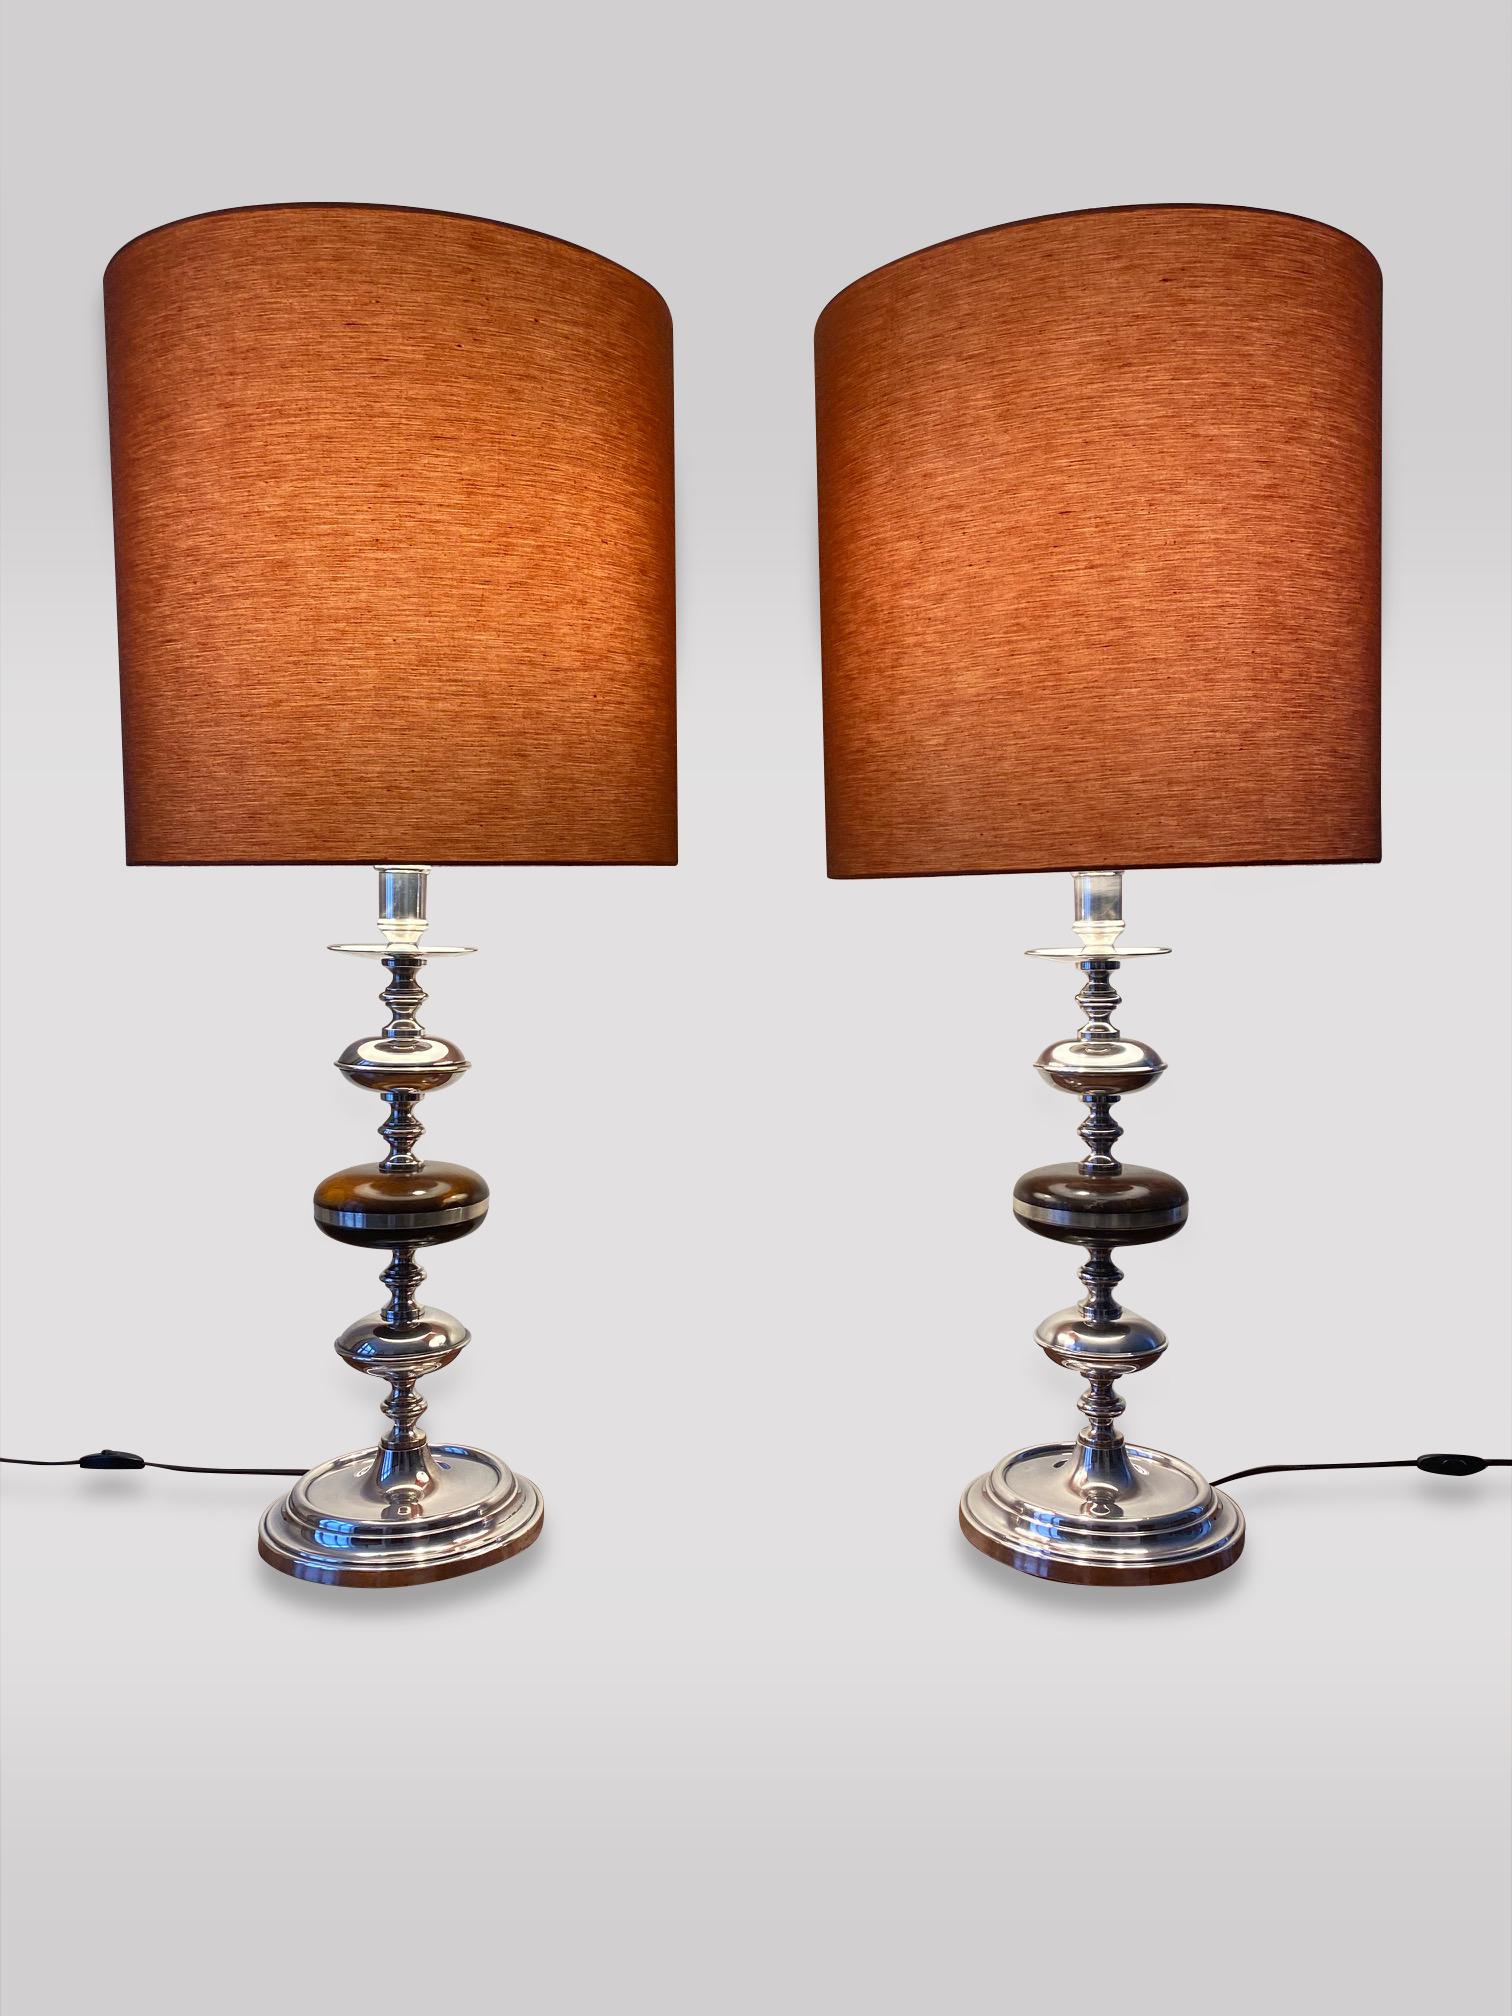 A very decorative pair of tall silver candelabra table lamps with high circular orange colour lamp shades. In perfect working order. 

The measurements of the lampshade are 45cm High and 46cm Diam. 
The measurements of the candelabra are 102cm High